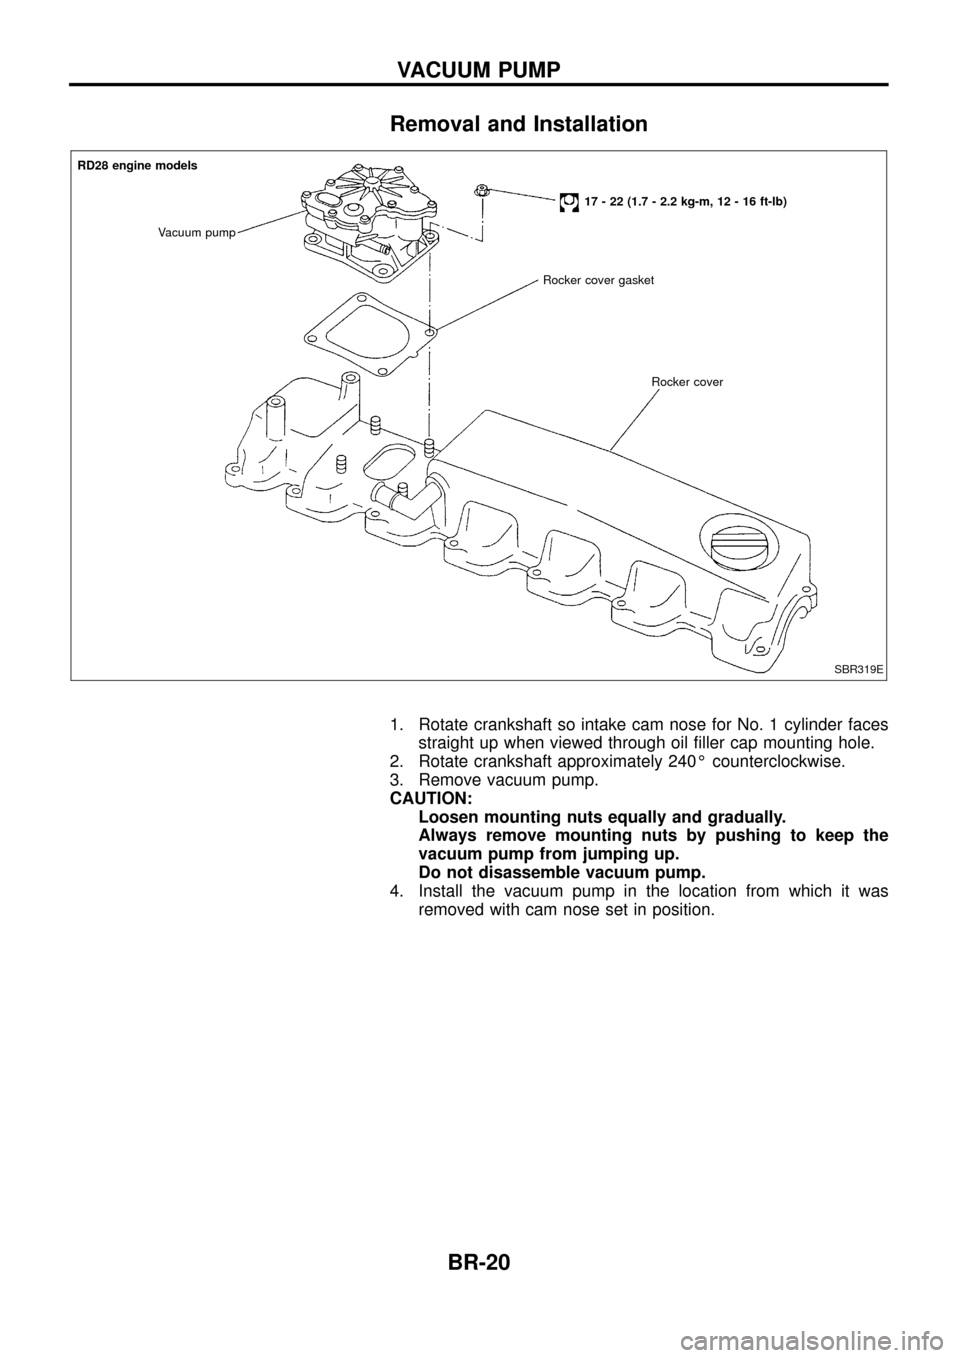 NISSAN PATROL 1998 Y61 / 5.G Brake System Workshop Manual Removal and Installation
1. Rotate crankshaft so intake cam nose for No. 1 cylinder facesstraight up when viewed through oil ®ller cap mounting hole.
2. Rotate crankshaft approximately 240É counterc